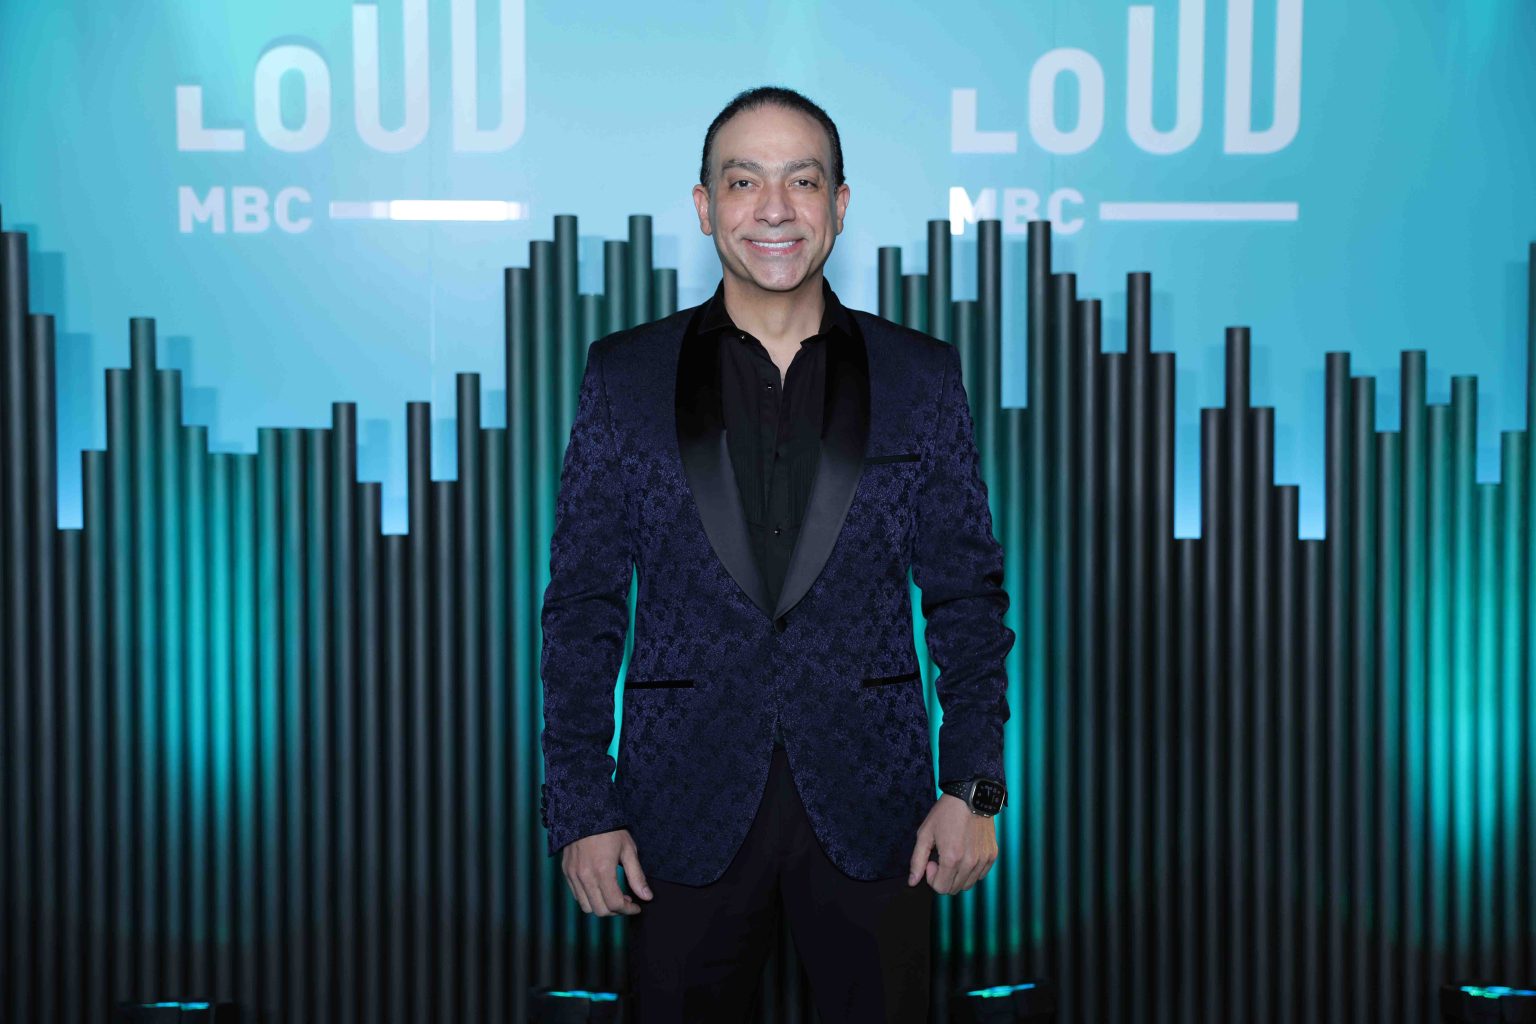 19 MBC LOUD FM LAUNCH EVENT MAESTRO WALID FAYED 1536x1024 1